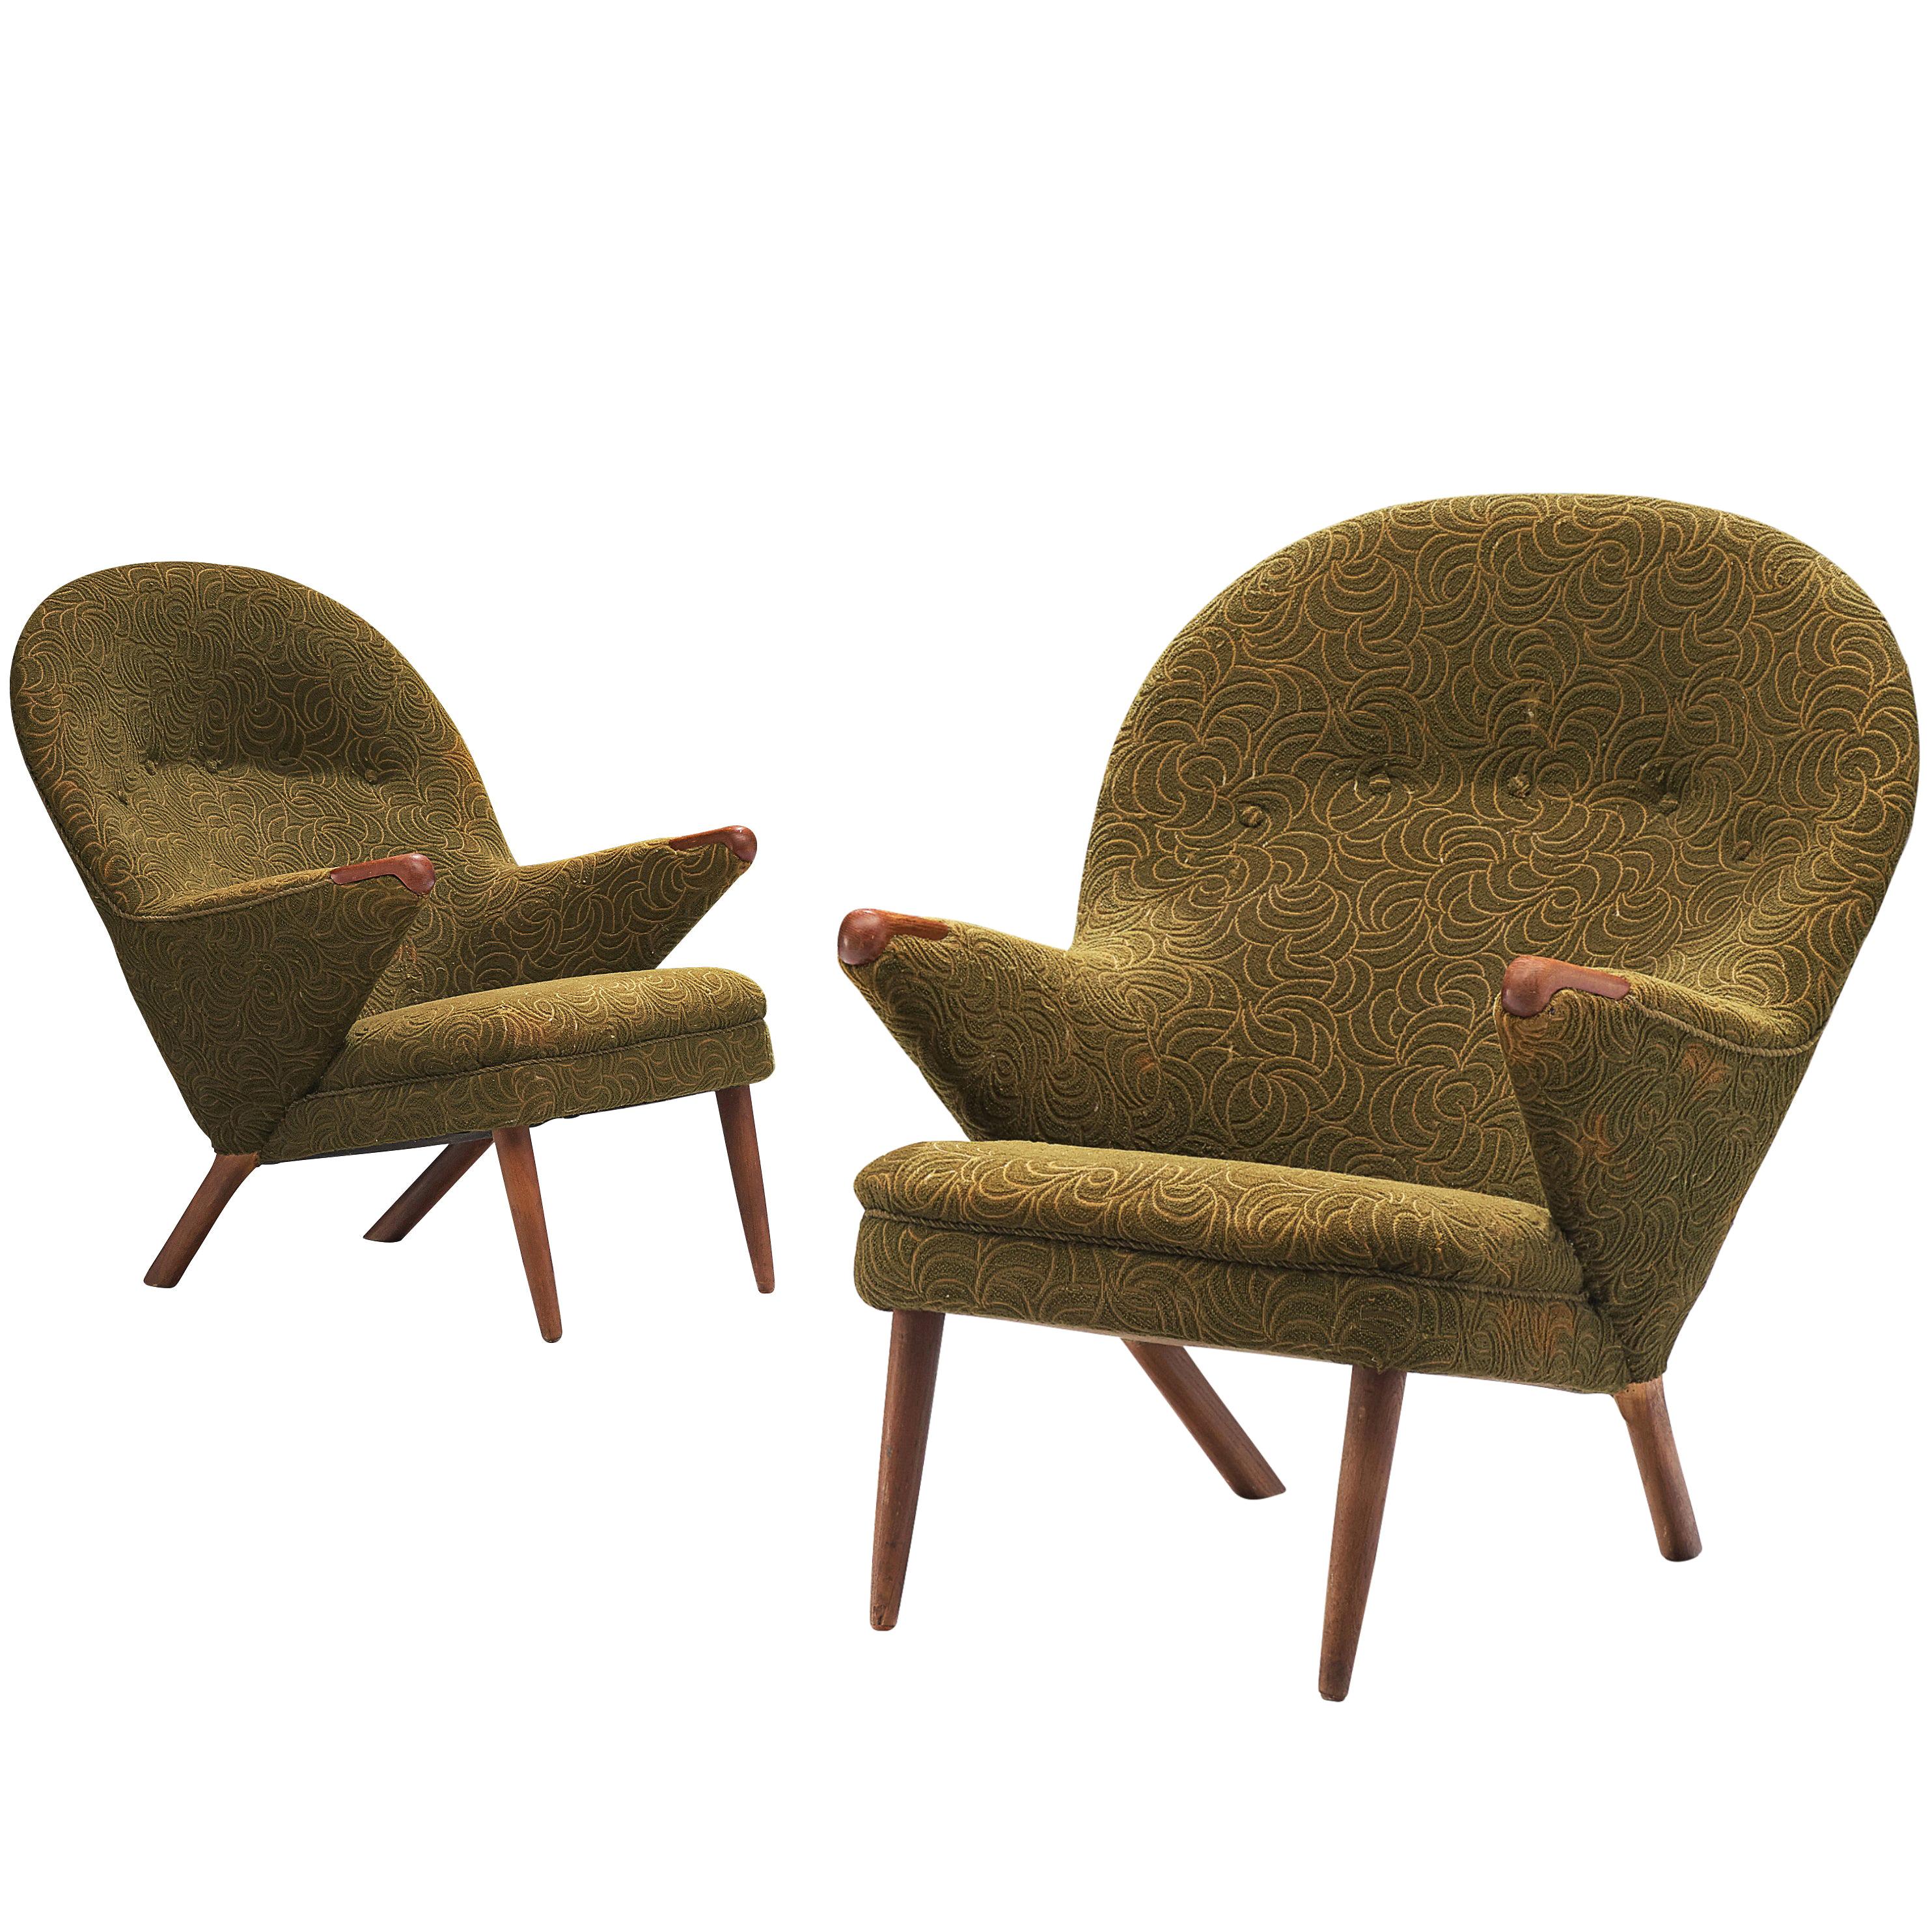 Georg Thams Lounge Chairs Model 47 in Teak and Patterned Green Fabric